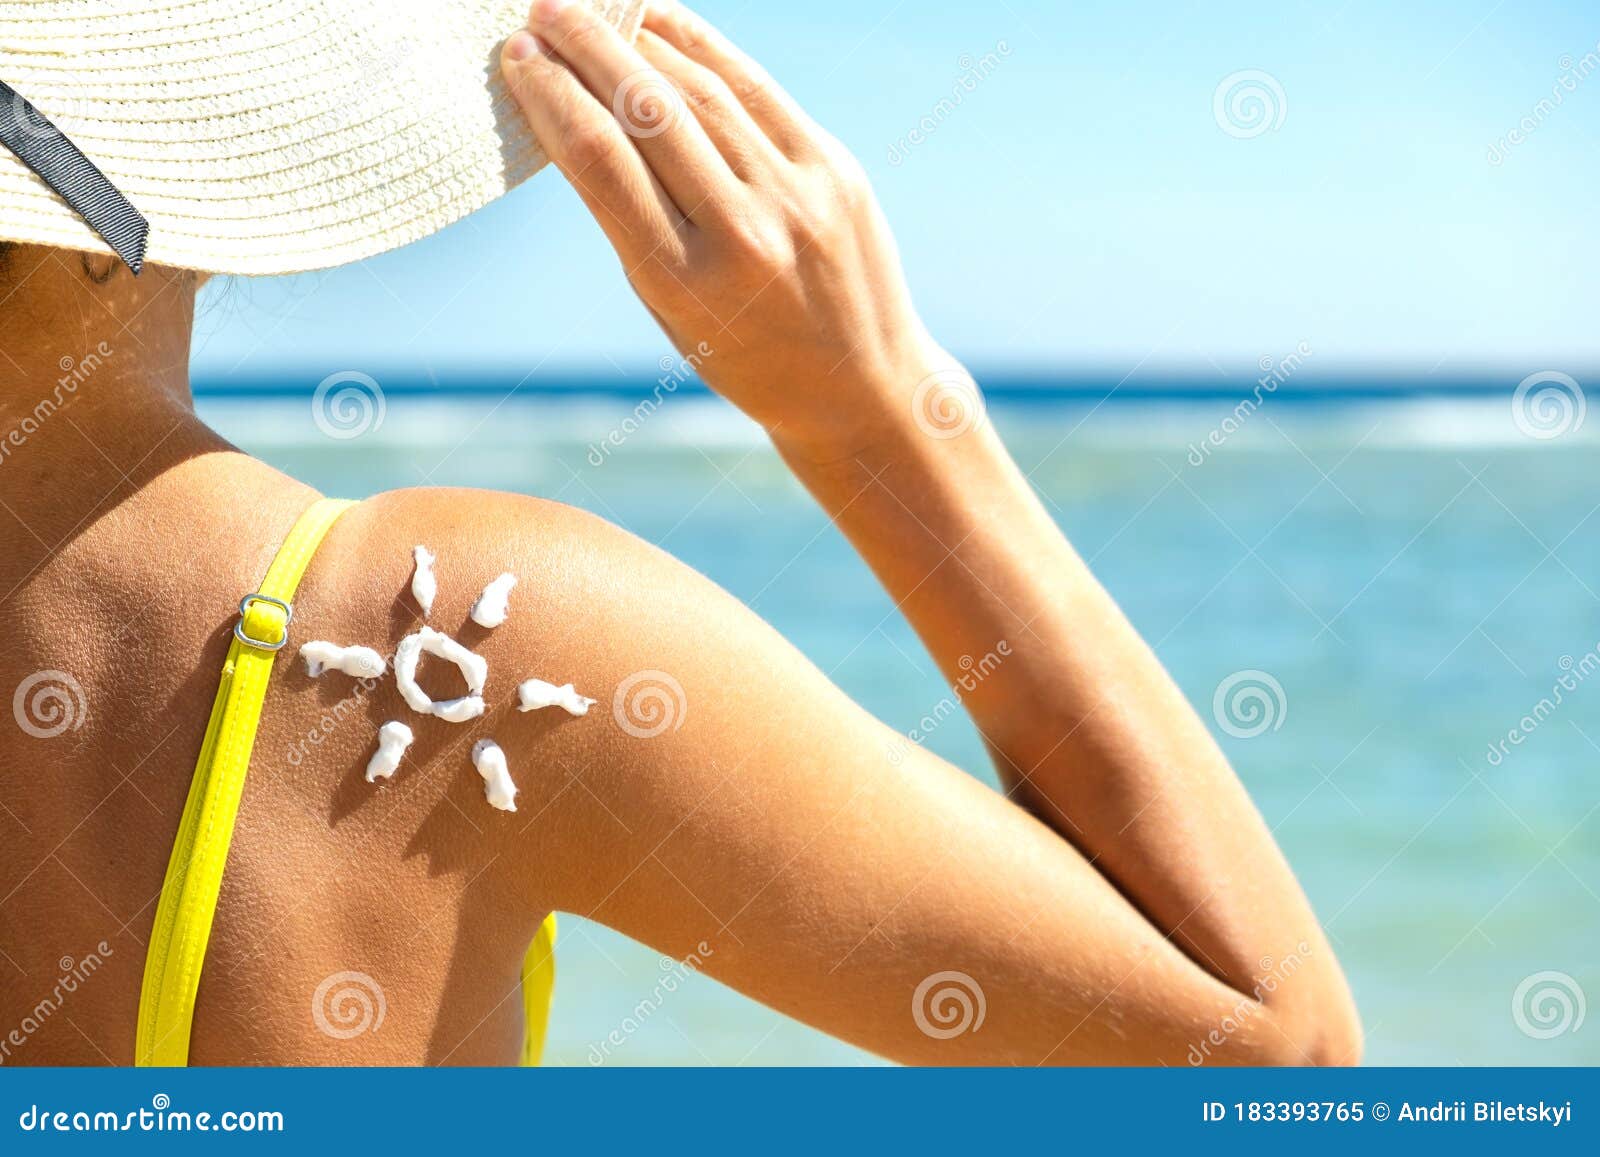 Back View of Young Woman Tanning at the Beach with Sunscreen Cream in Sun  Shape on Her Shoulder. UV Sunburn Protection and Stock Image - Image of  skincare, applying: 183393765